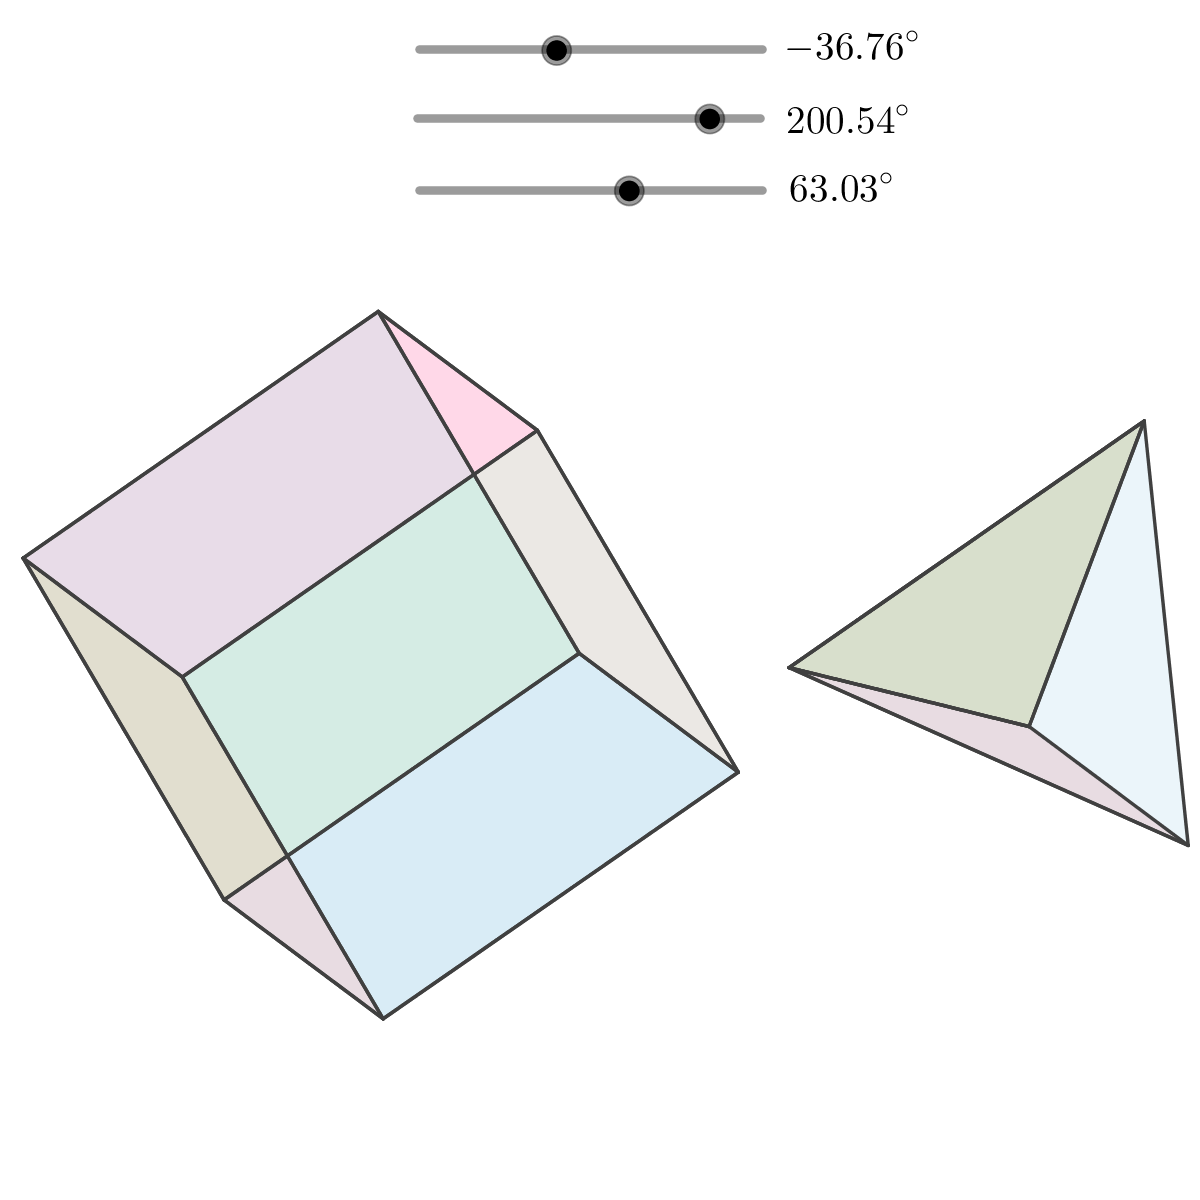 3d cubes in different perspective angles Vector Image